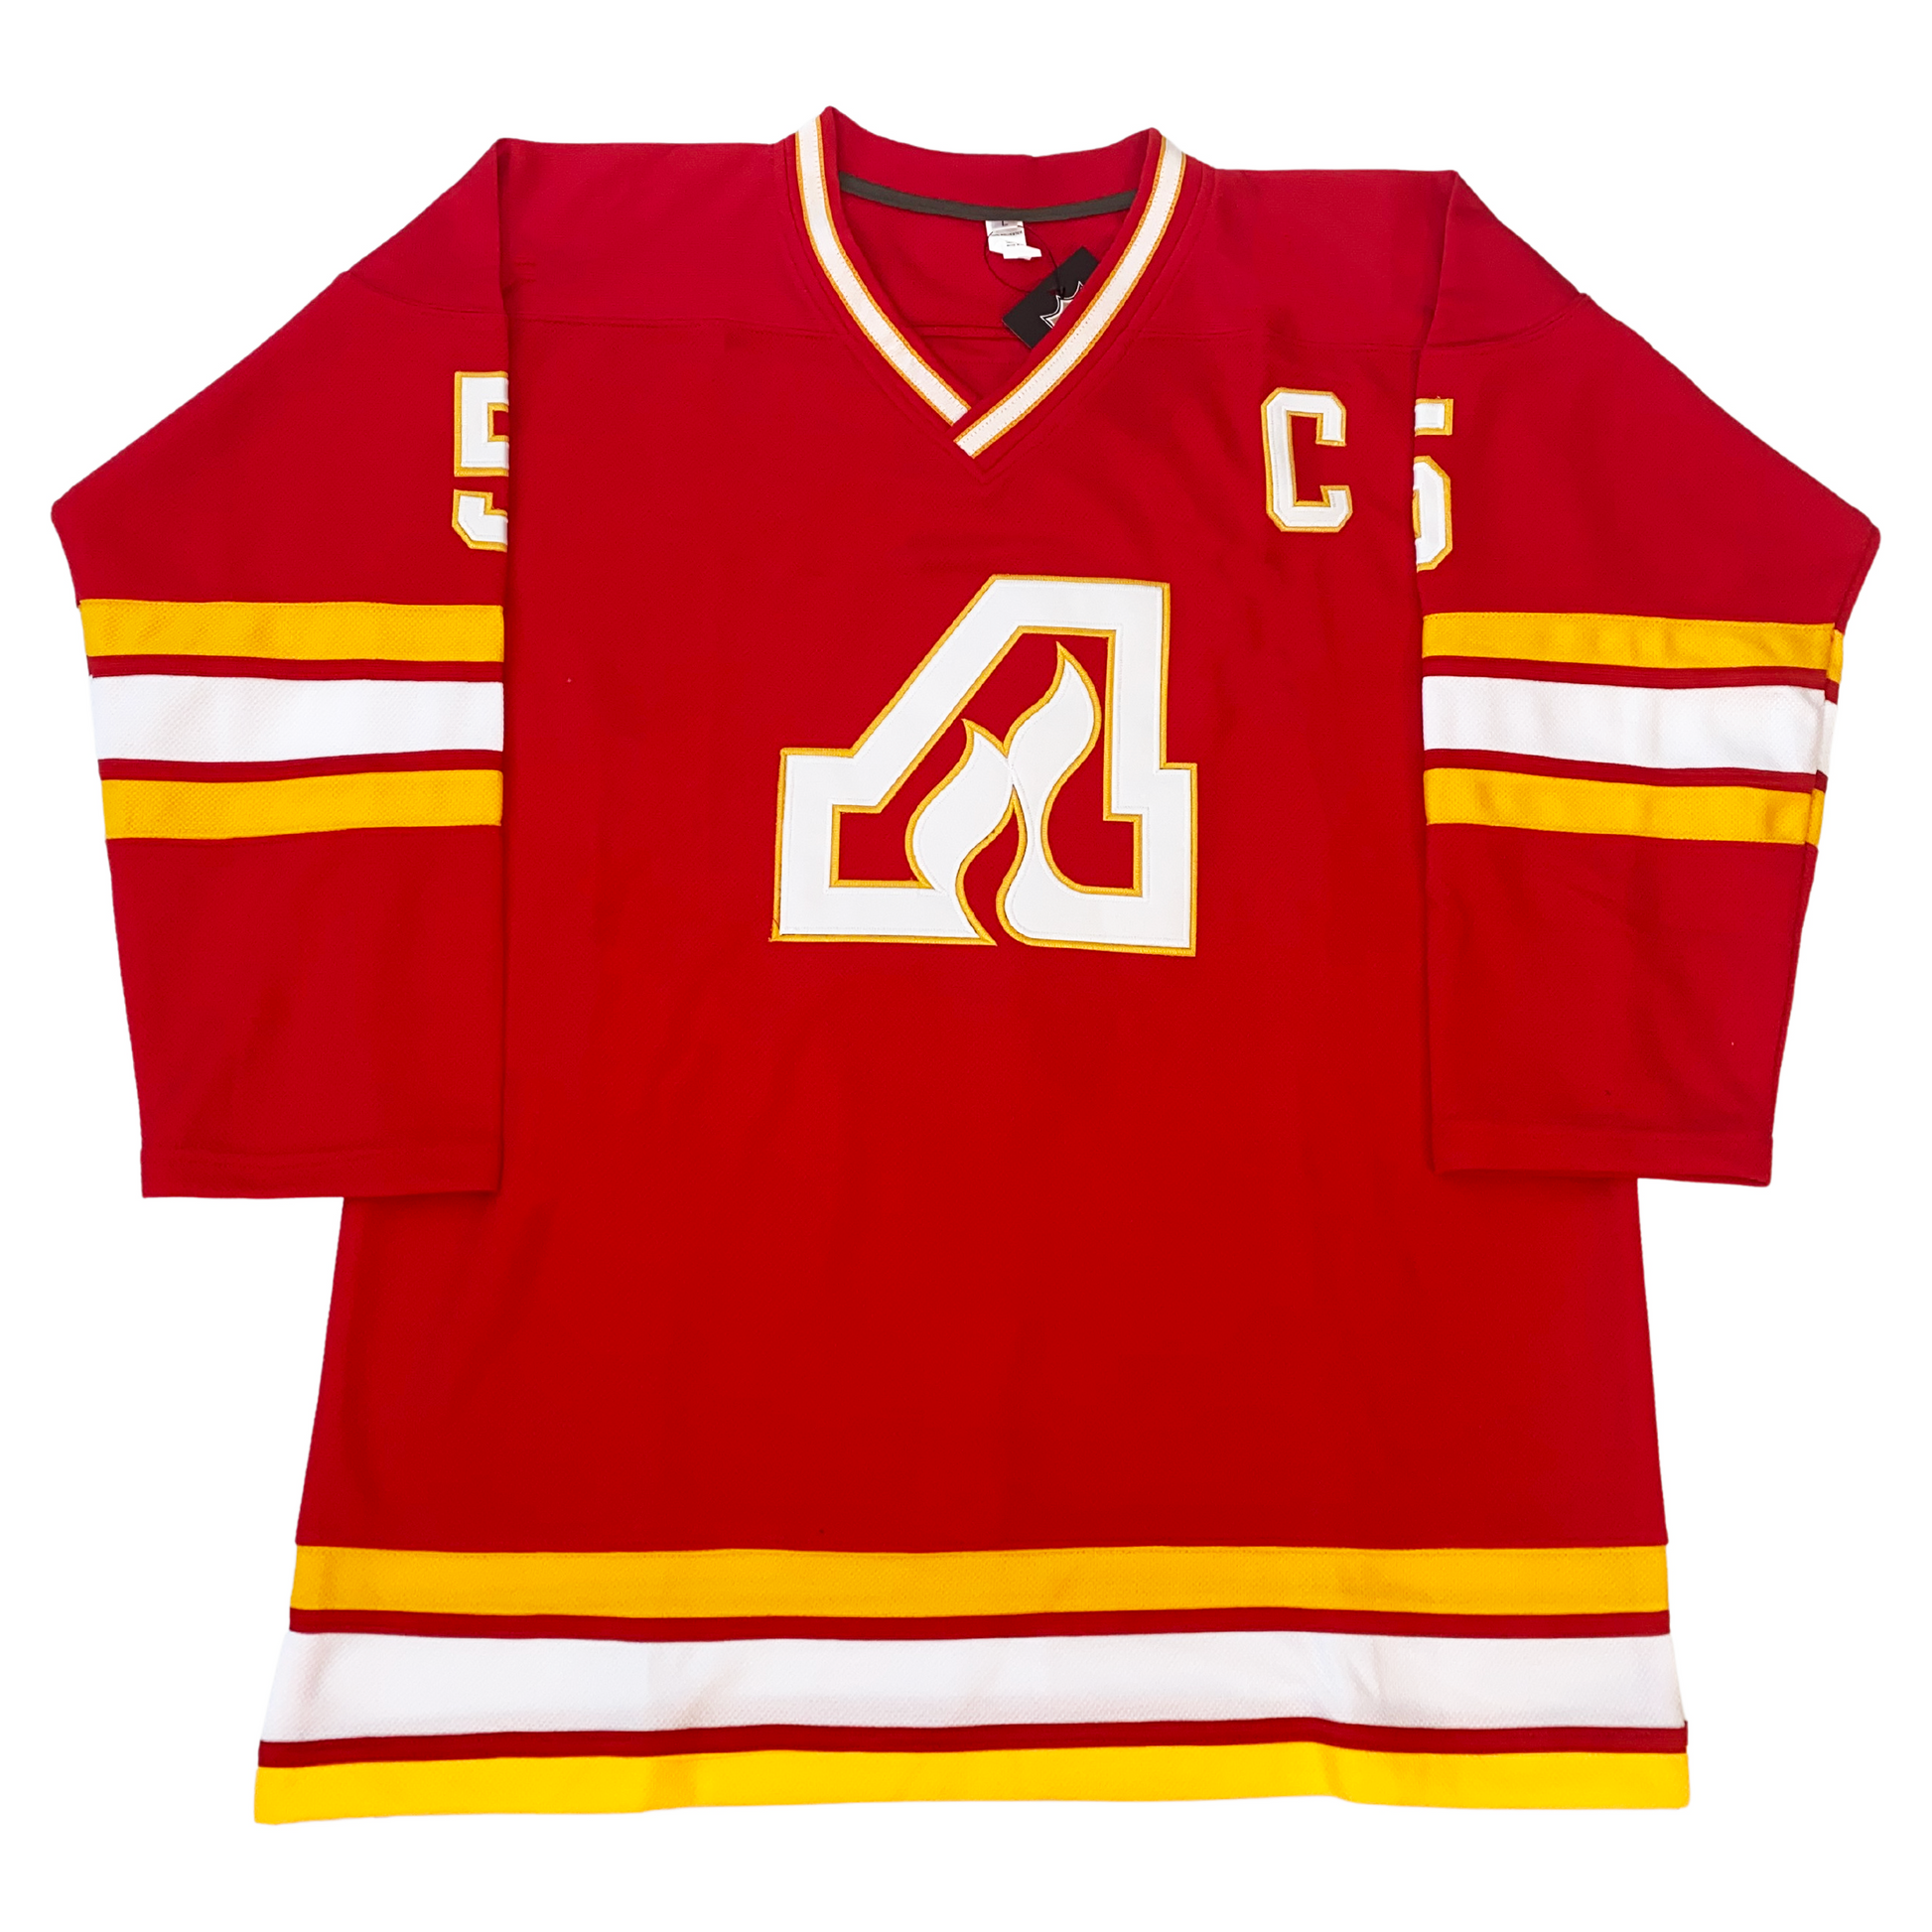 Youth XL Flames Jersey